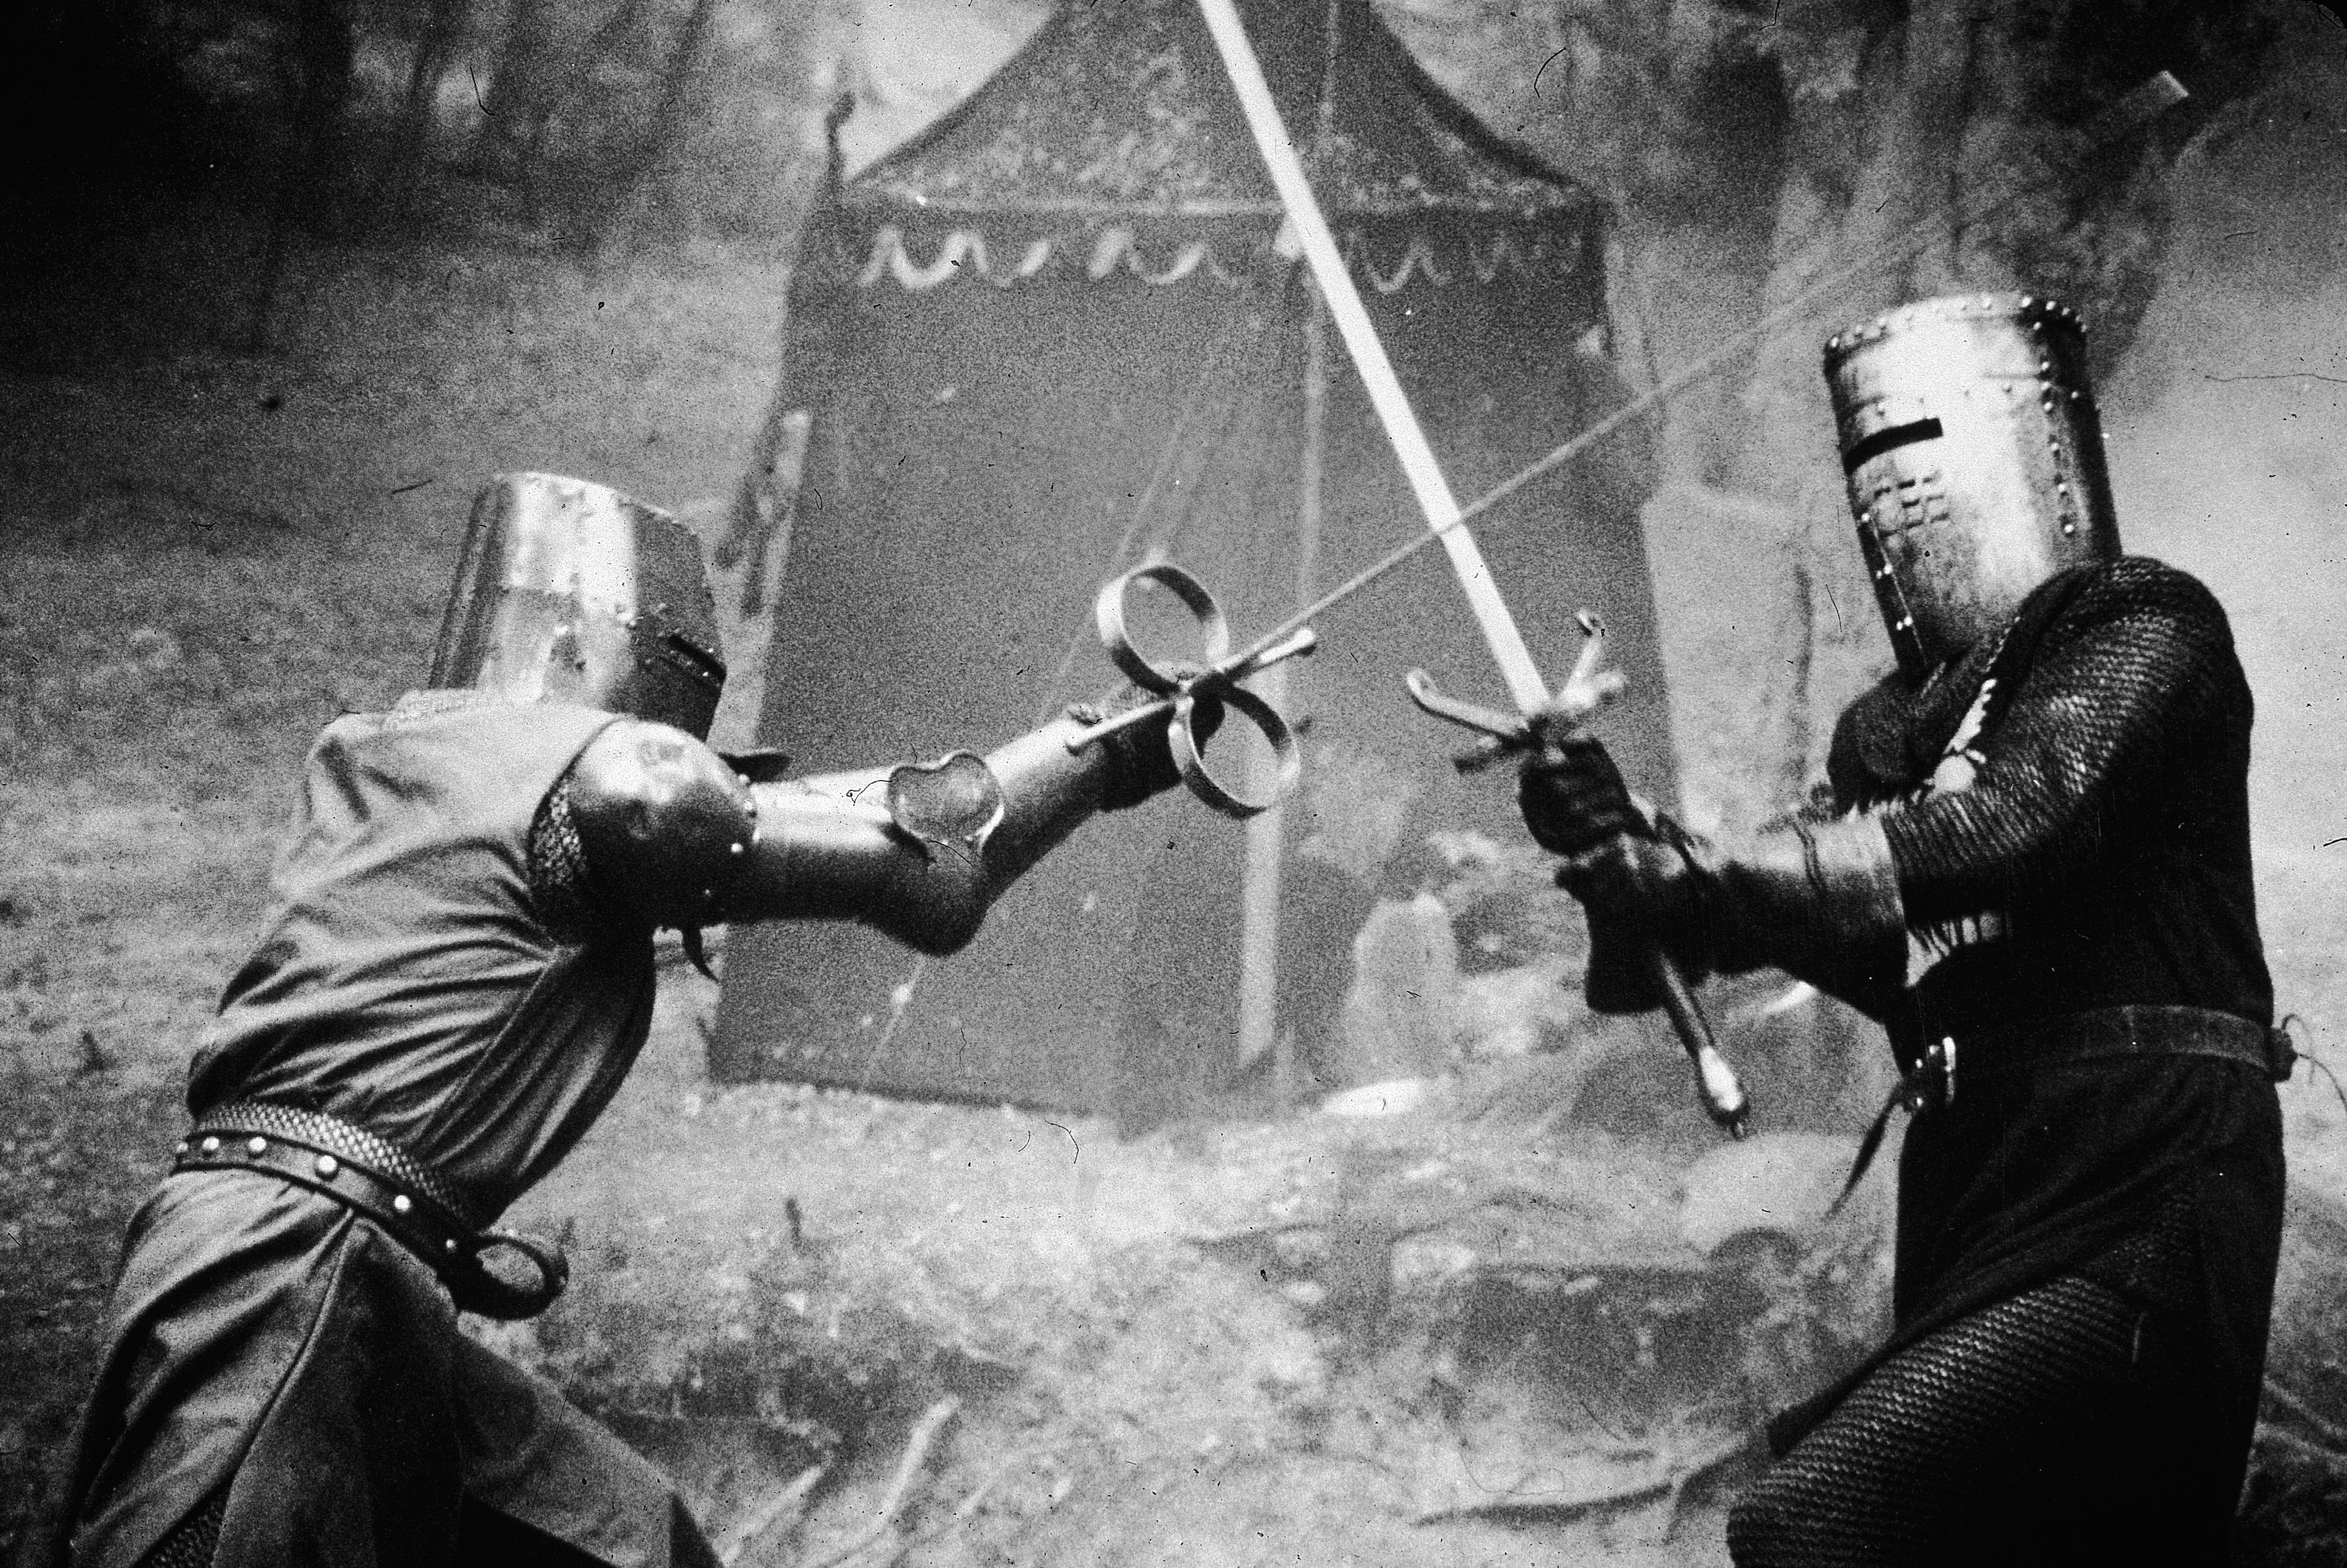 John Cleese, Terry Gilliam, and Monty Python in Monty Python and the Holy Grail (1975)